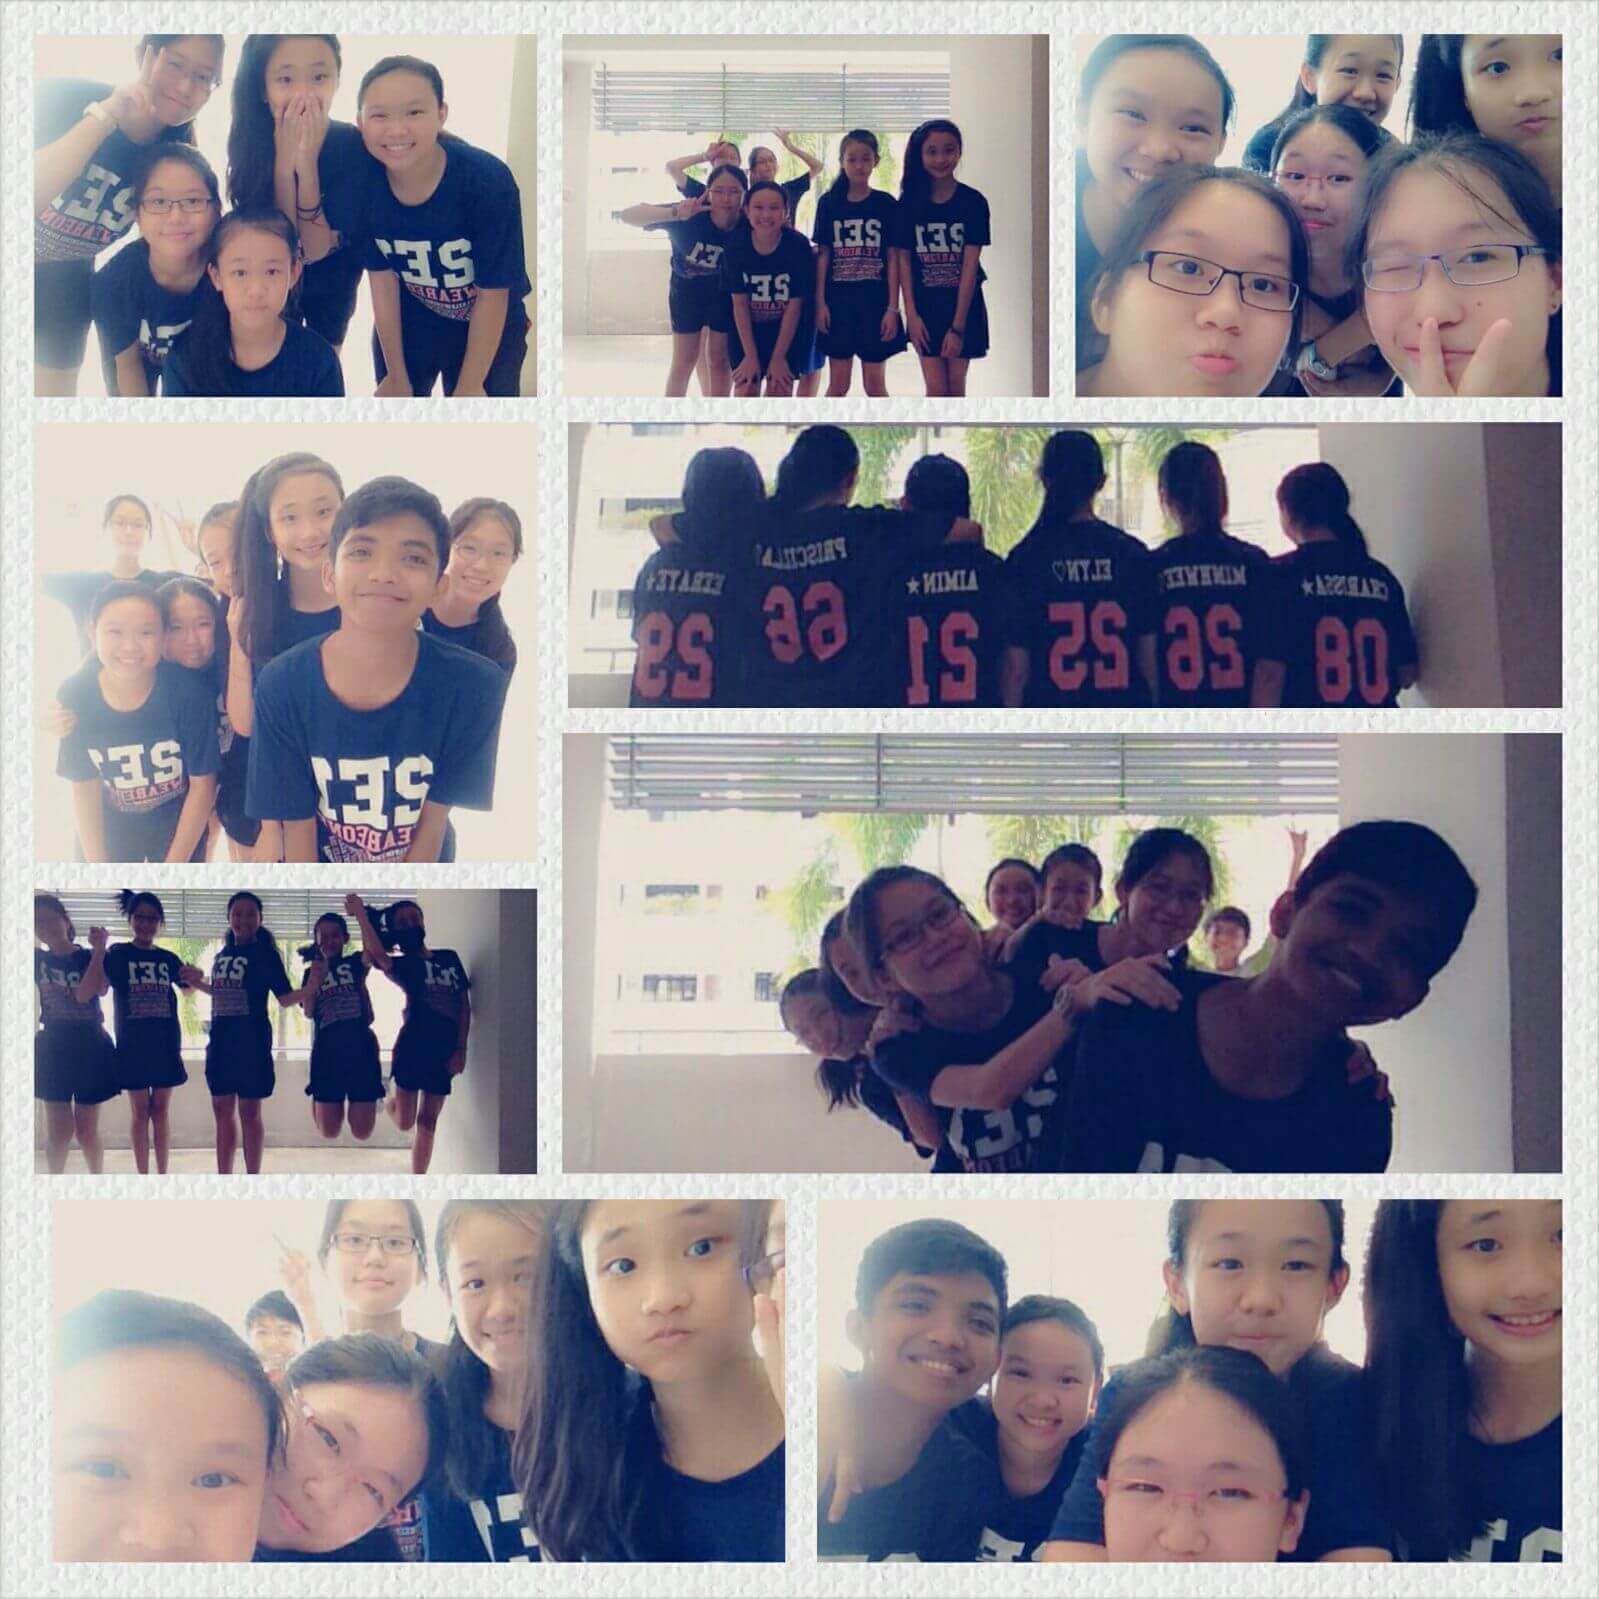 With Sec 2 Class